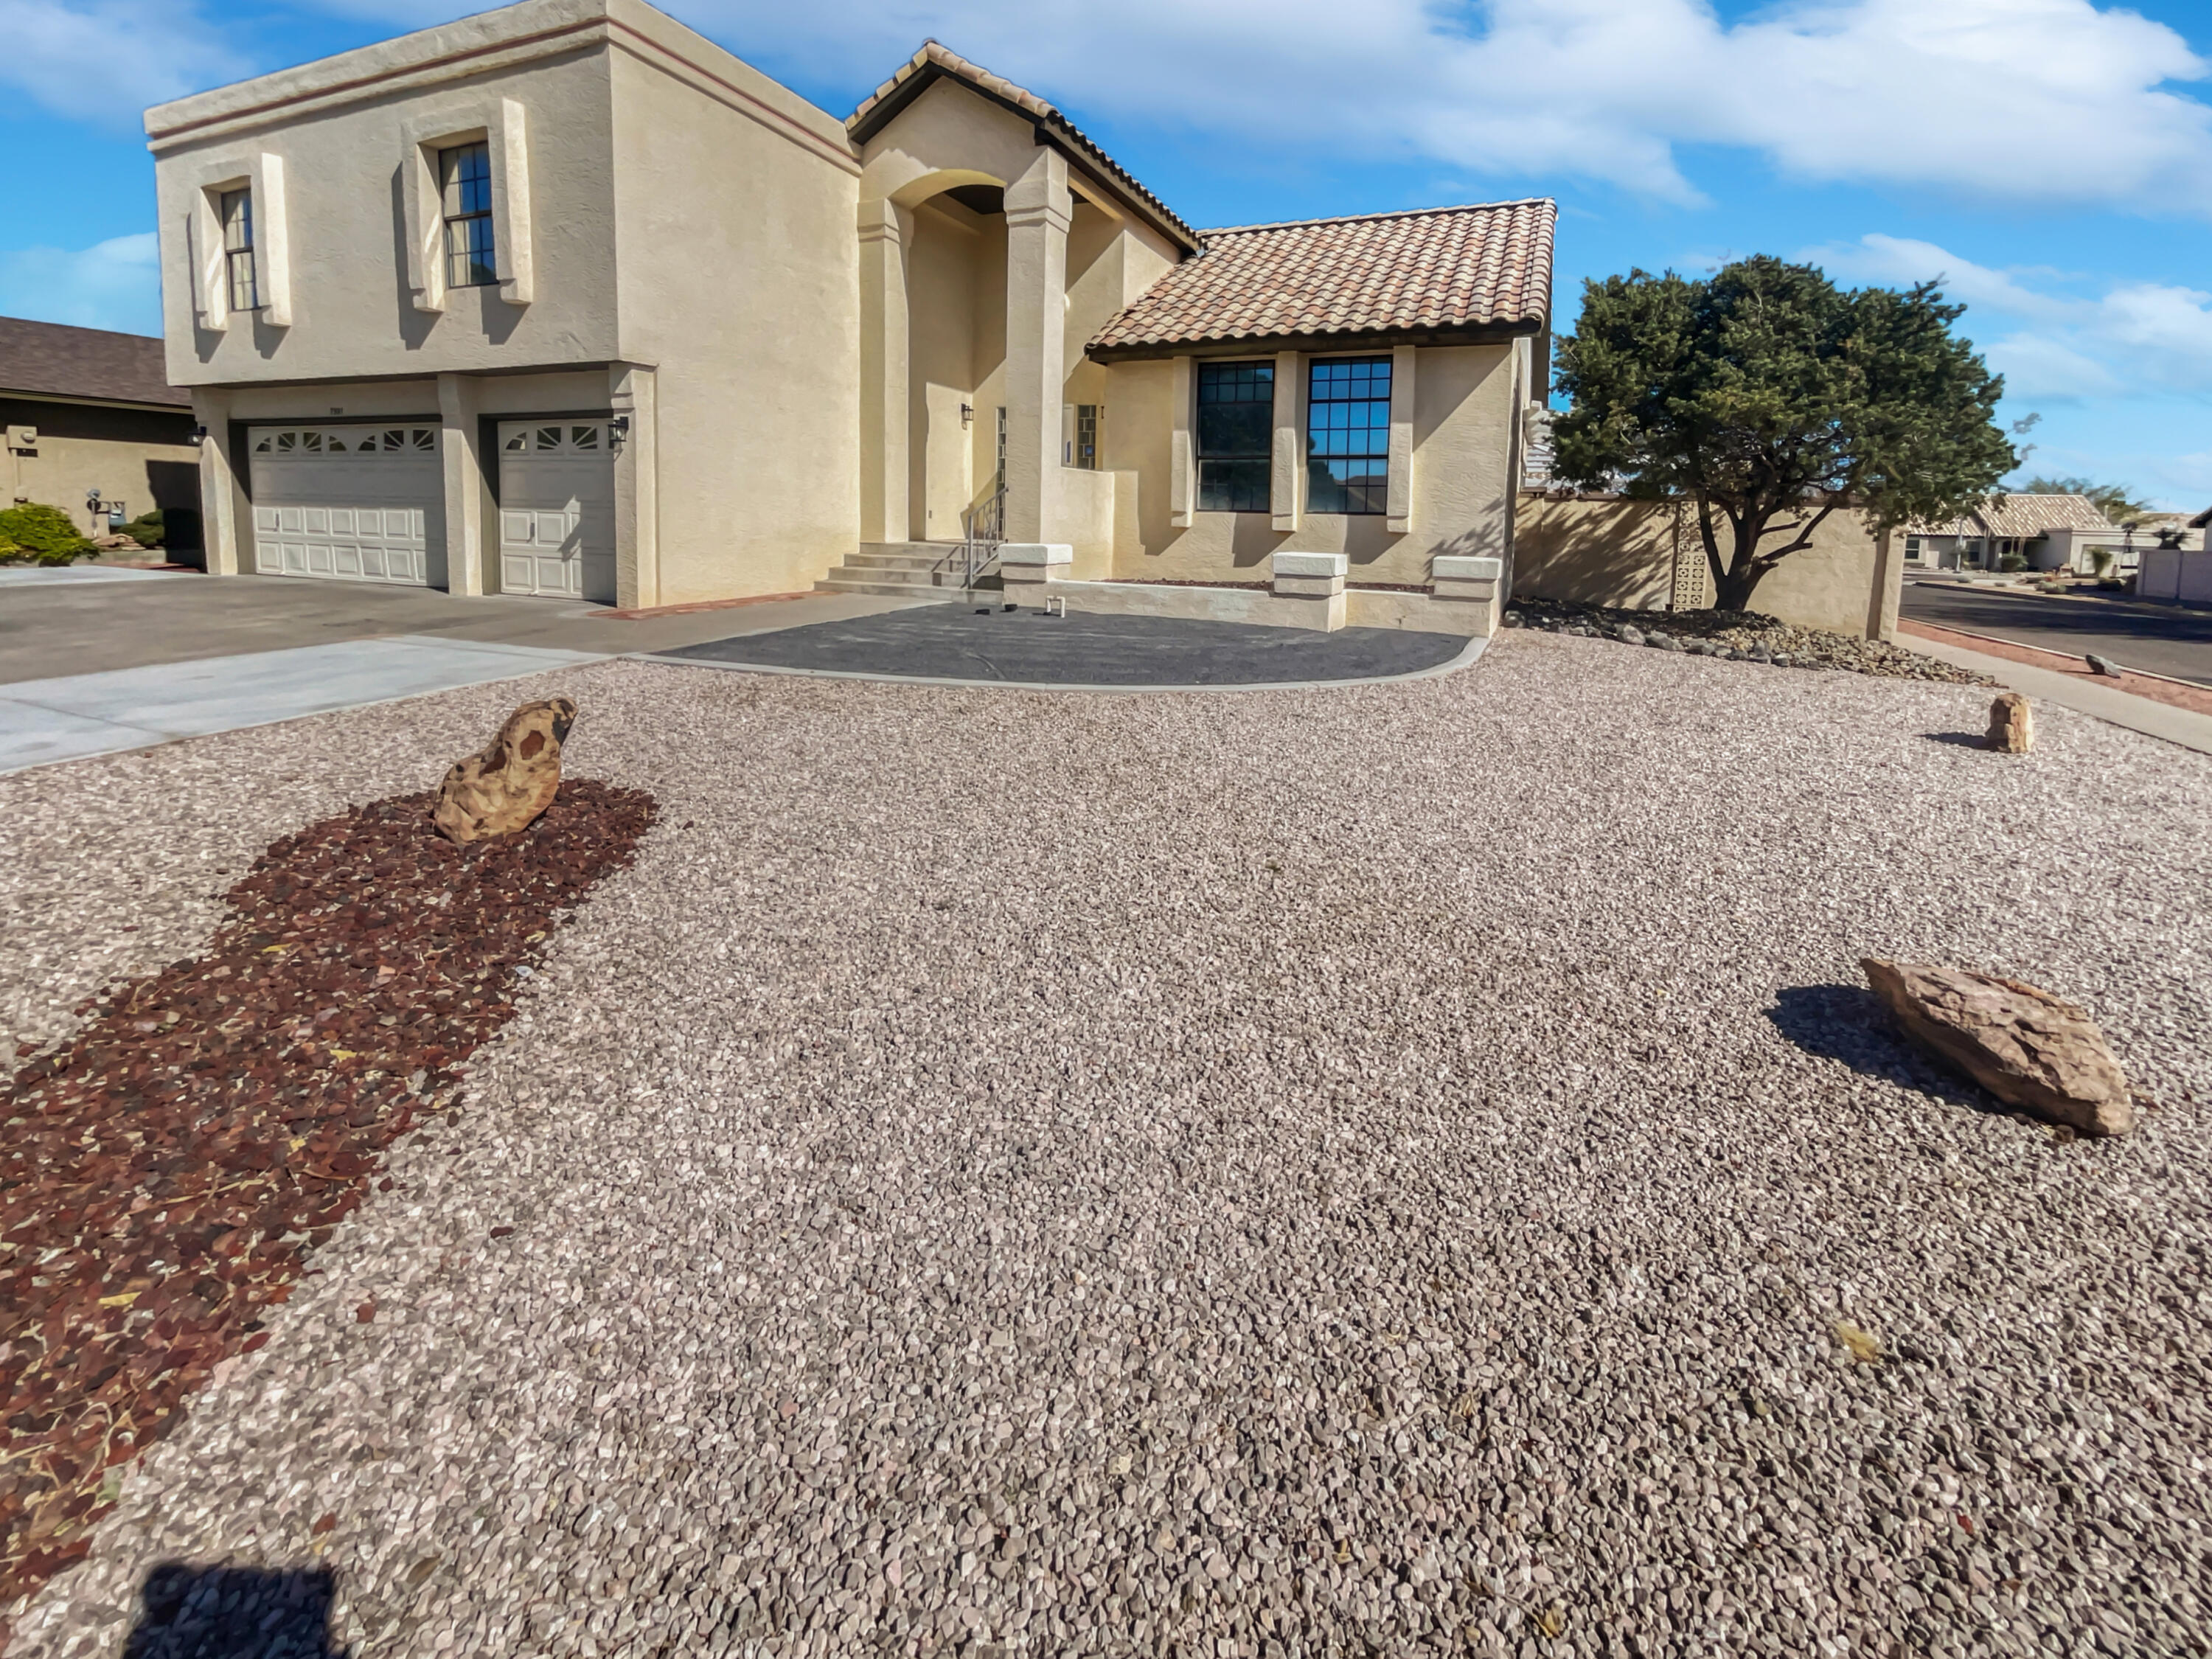 7501 Sherwood Drive NW, Albuquerque, New Mexico 87120, 4 Bedrooms Bedrooms, ,3 BathroomsBathrooms,Residential,For Sale,7501 Sherwood Drive NW,1060702